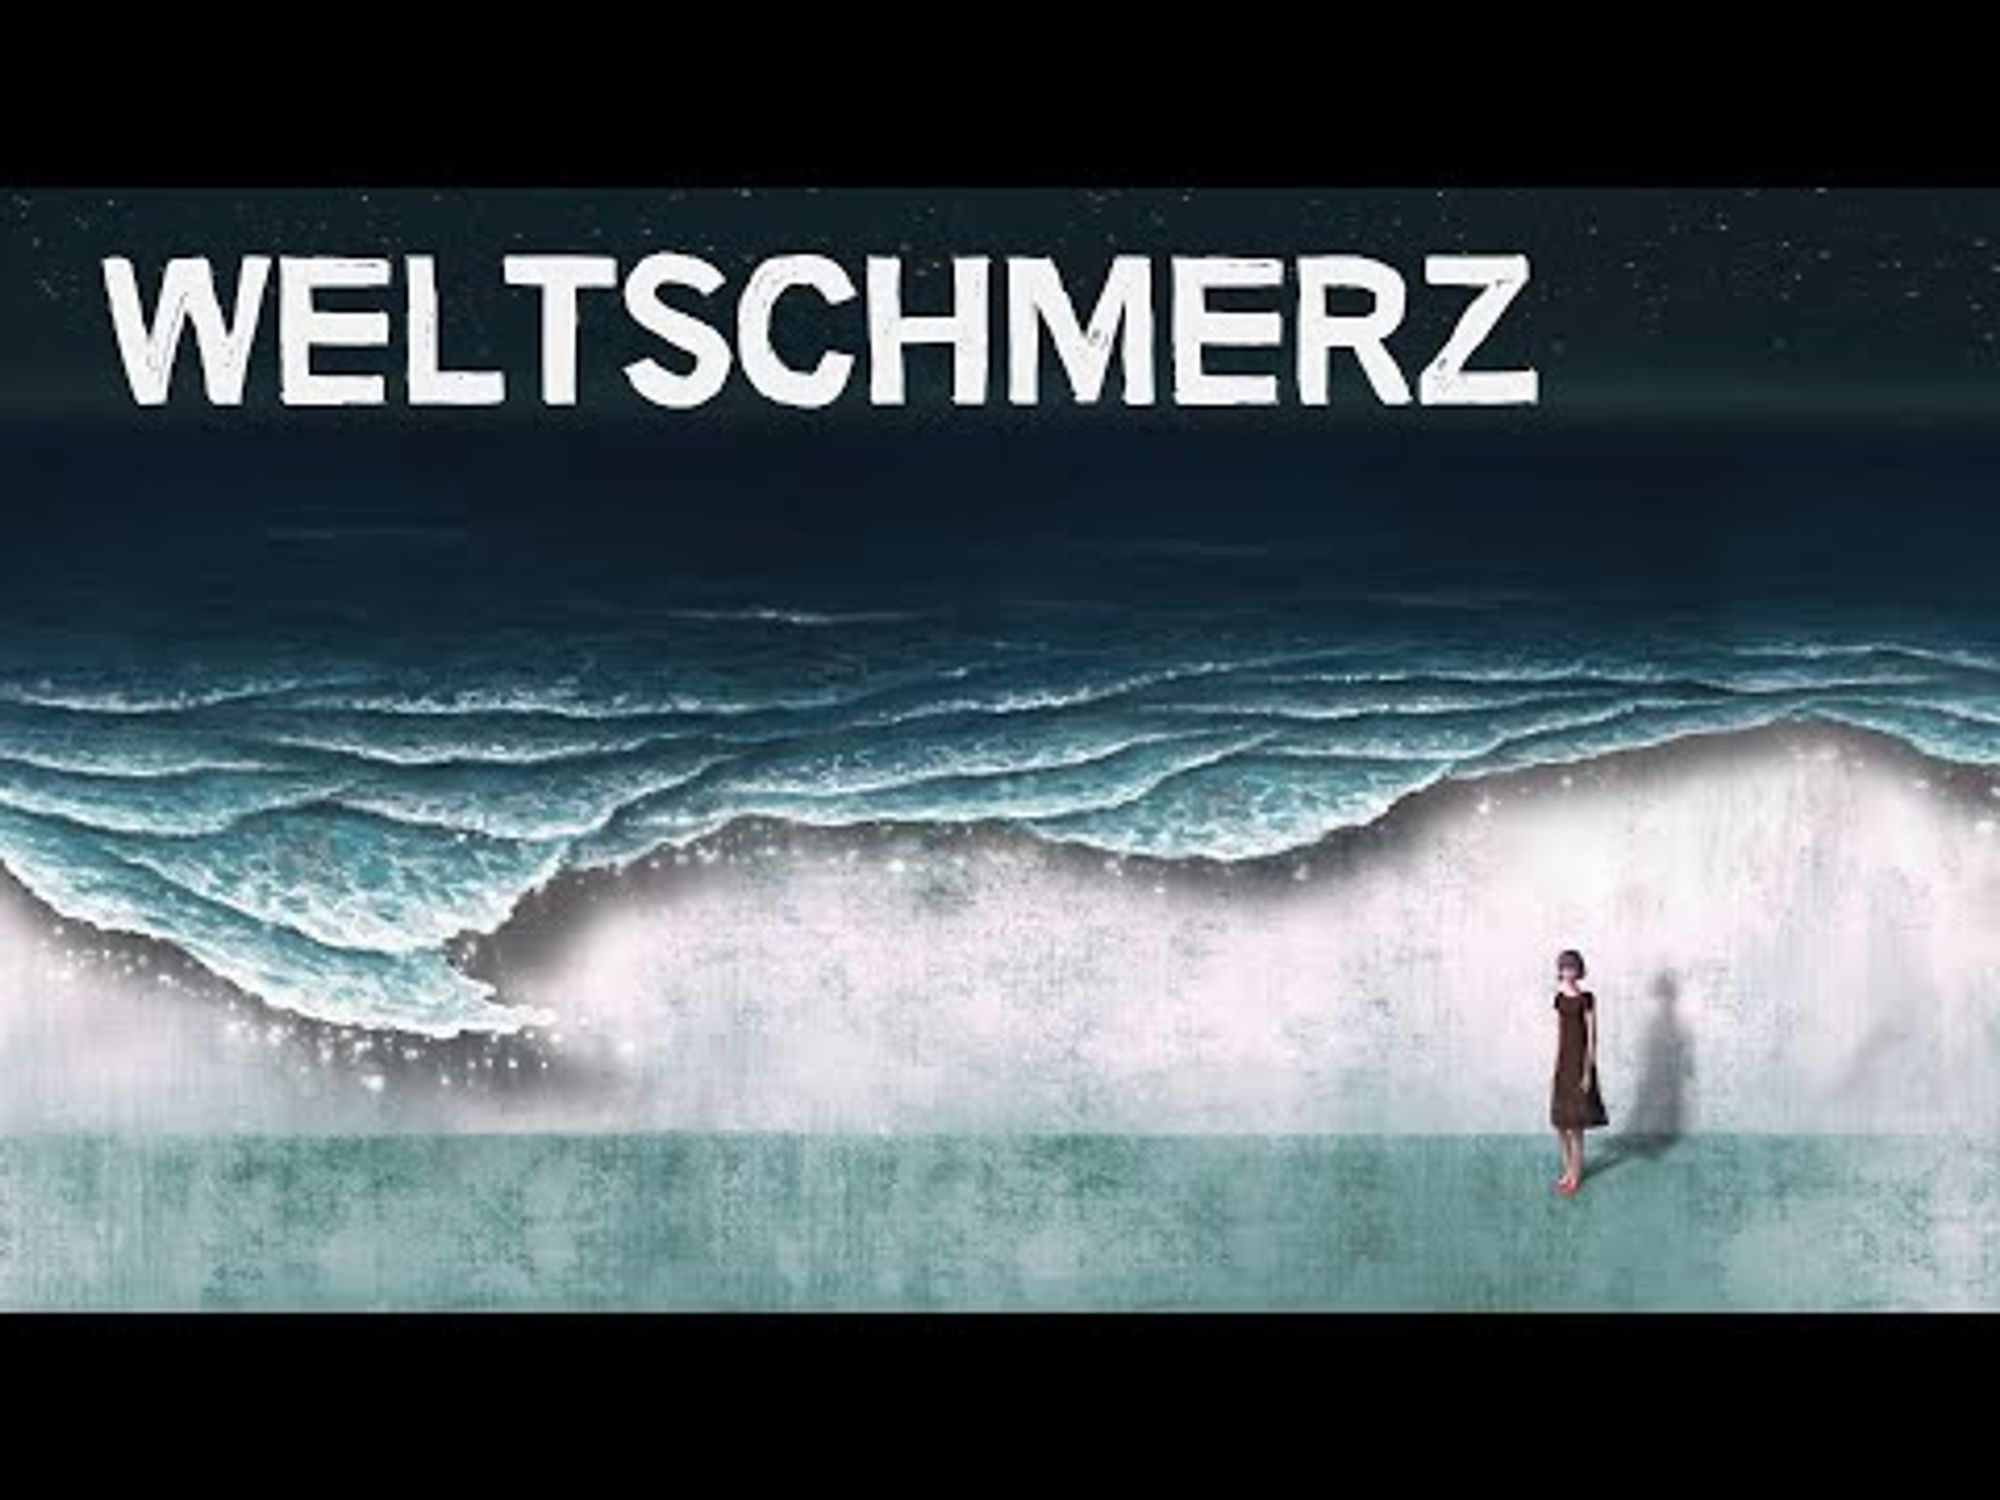 Sad, Bored, Anxious? Maybe You've Got Weltschmerz